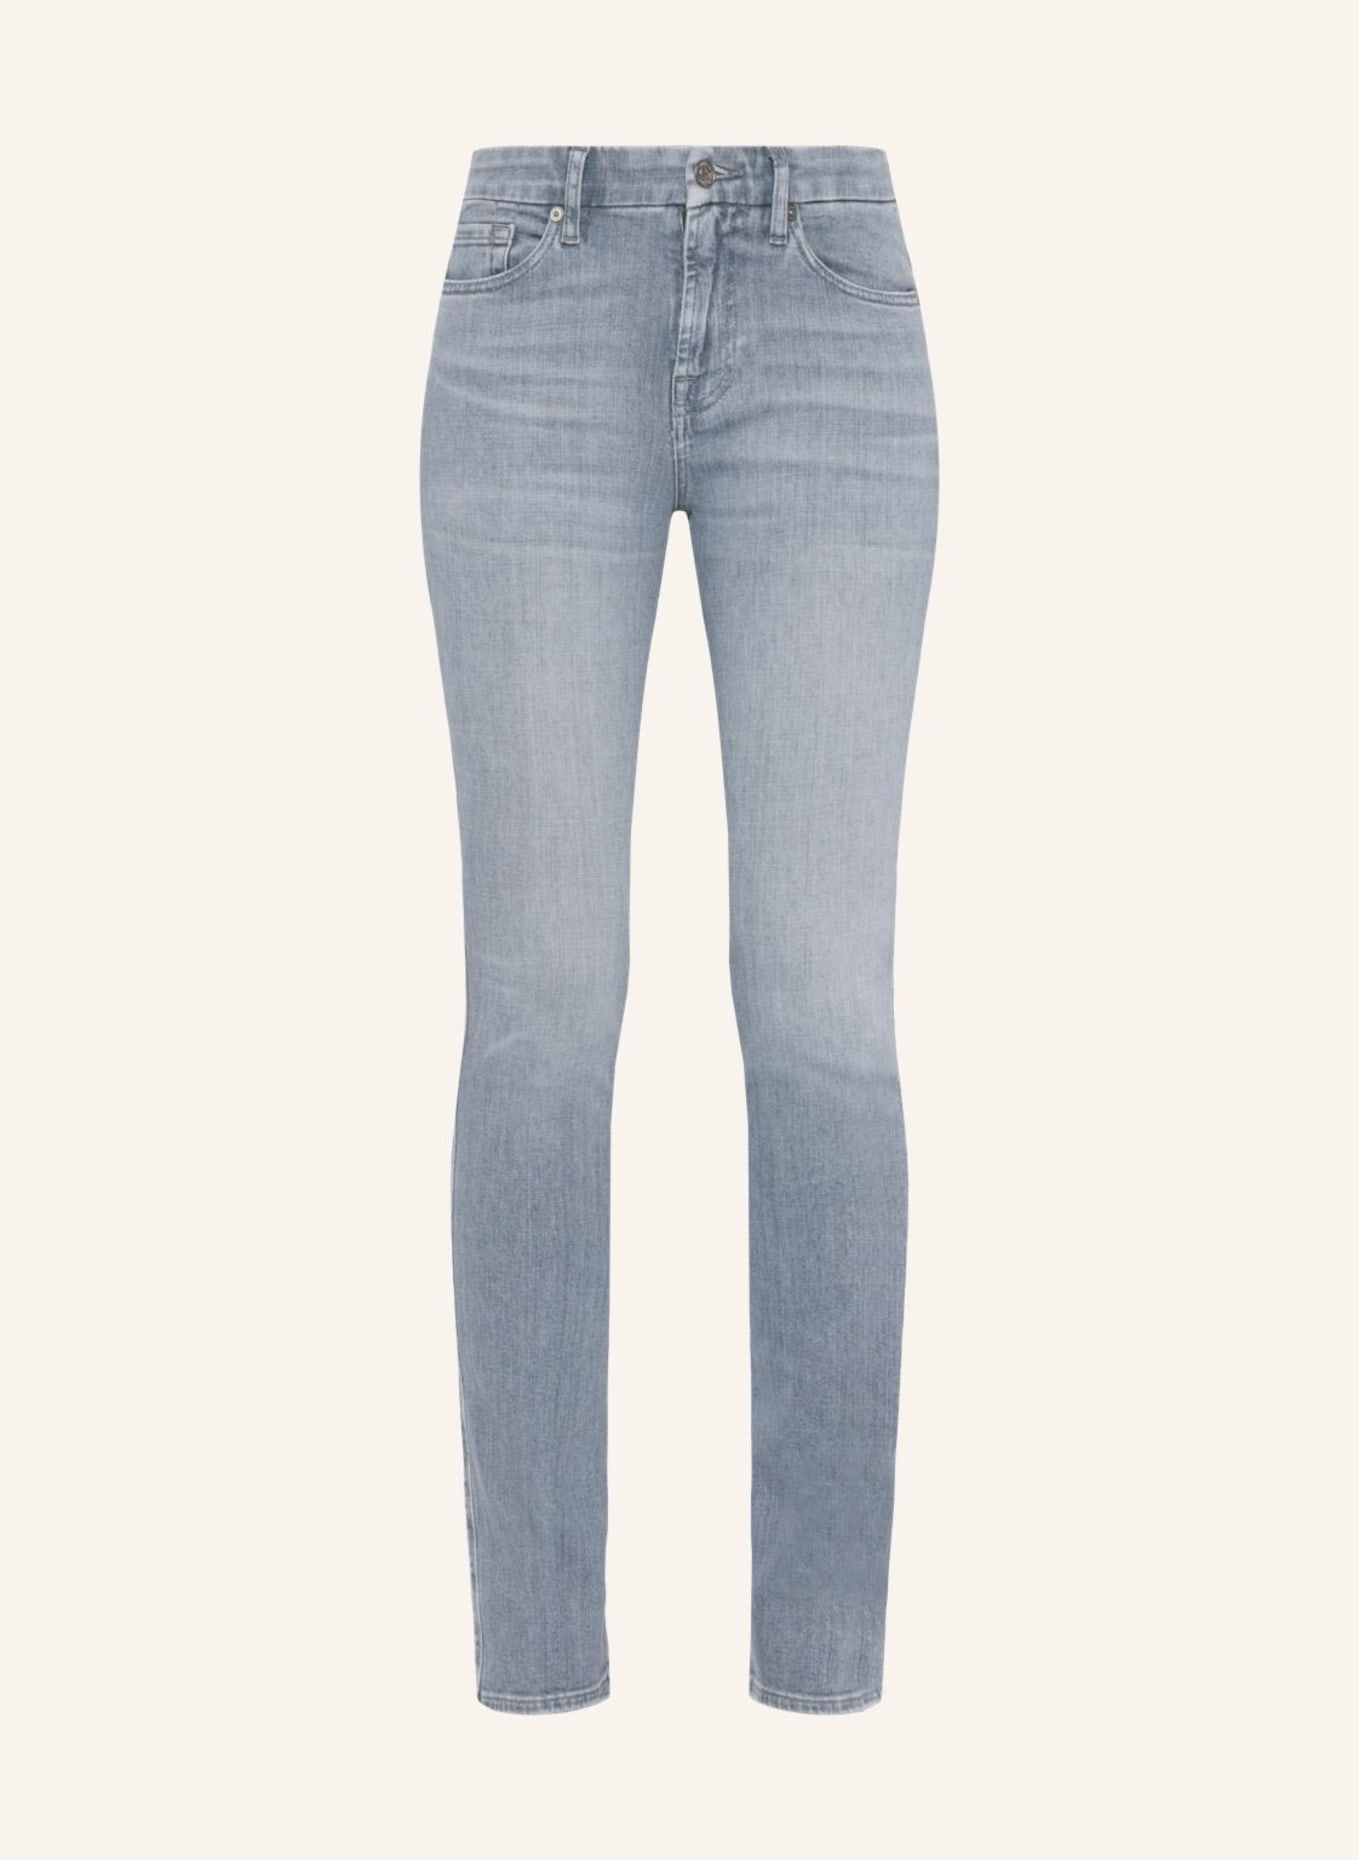 7 for all mankind Jeans KIMMIE STRAIGHT Straight fit, Farbe: GRAU (Bild 1)